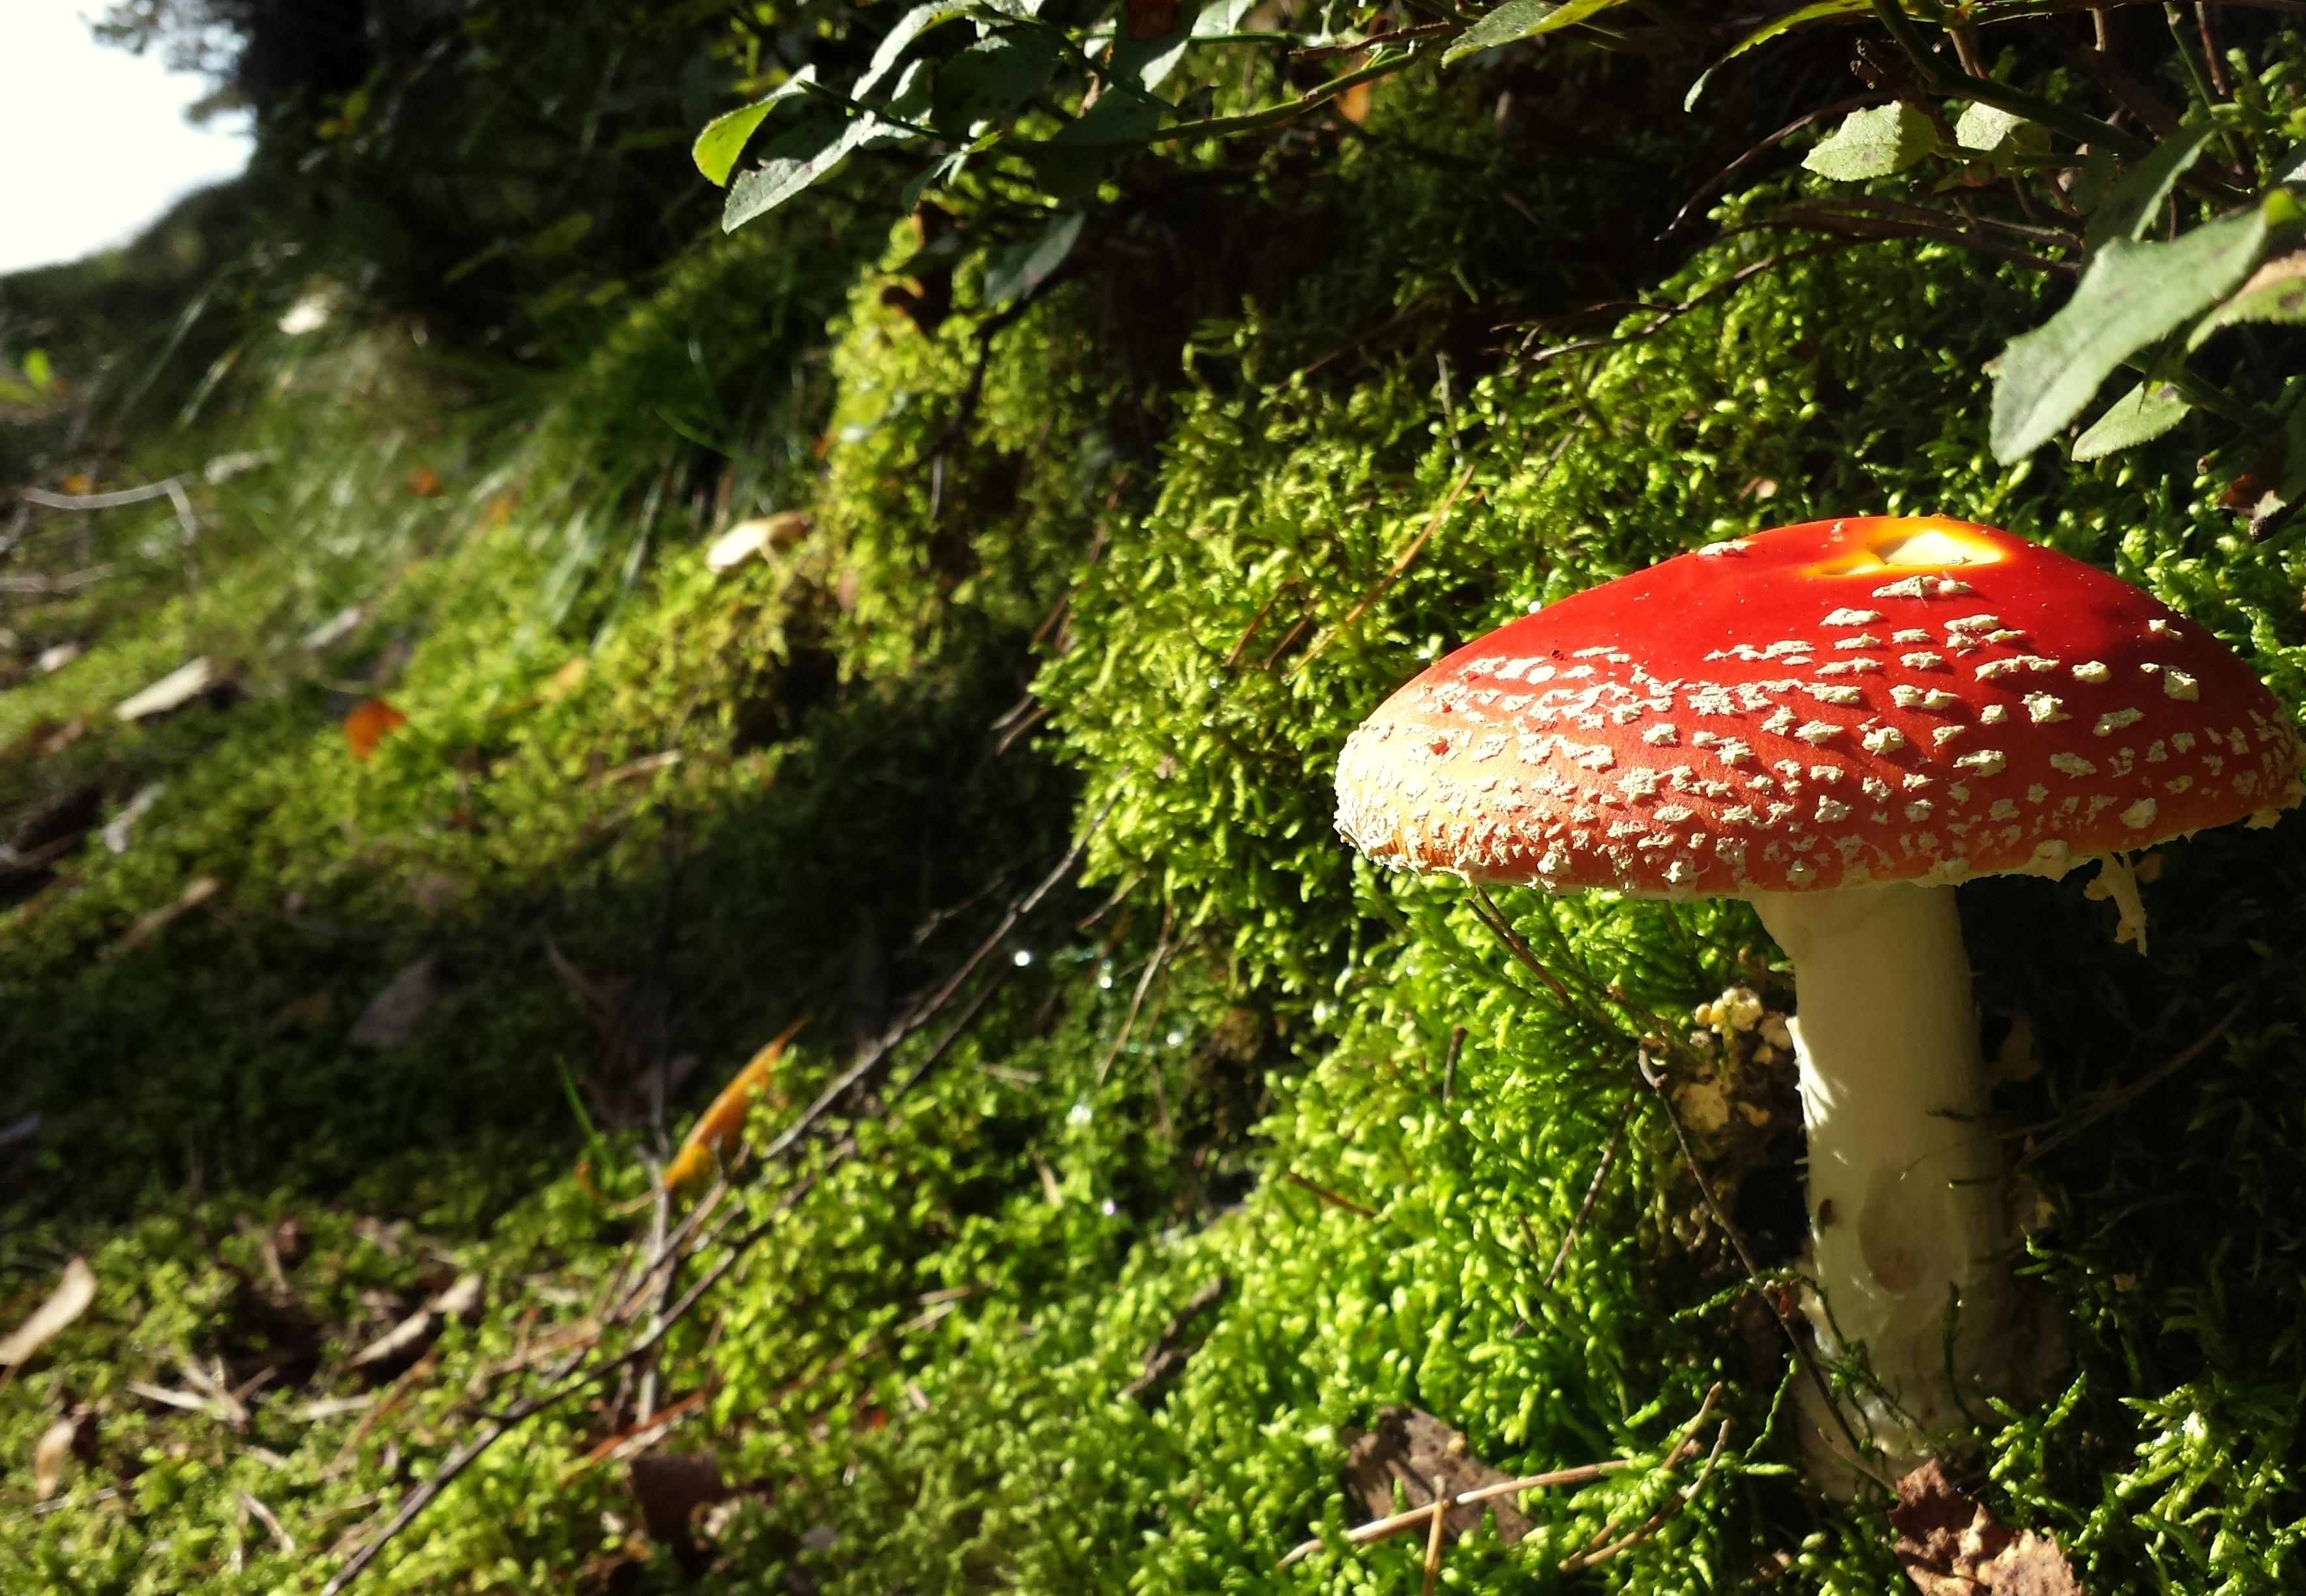 Free picture: mushroom, fungus, nature, poison, grass, wild, moss, toxic